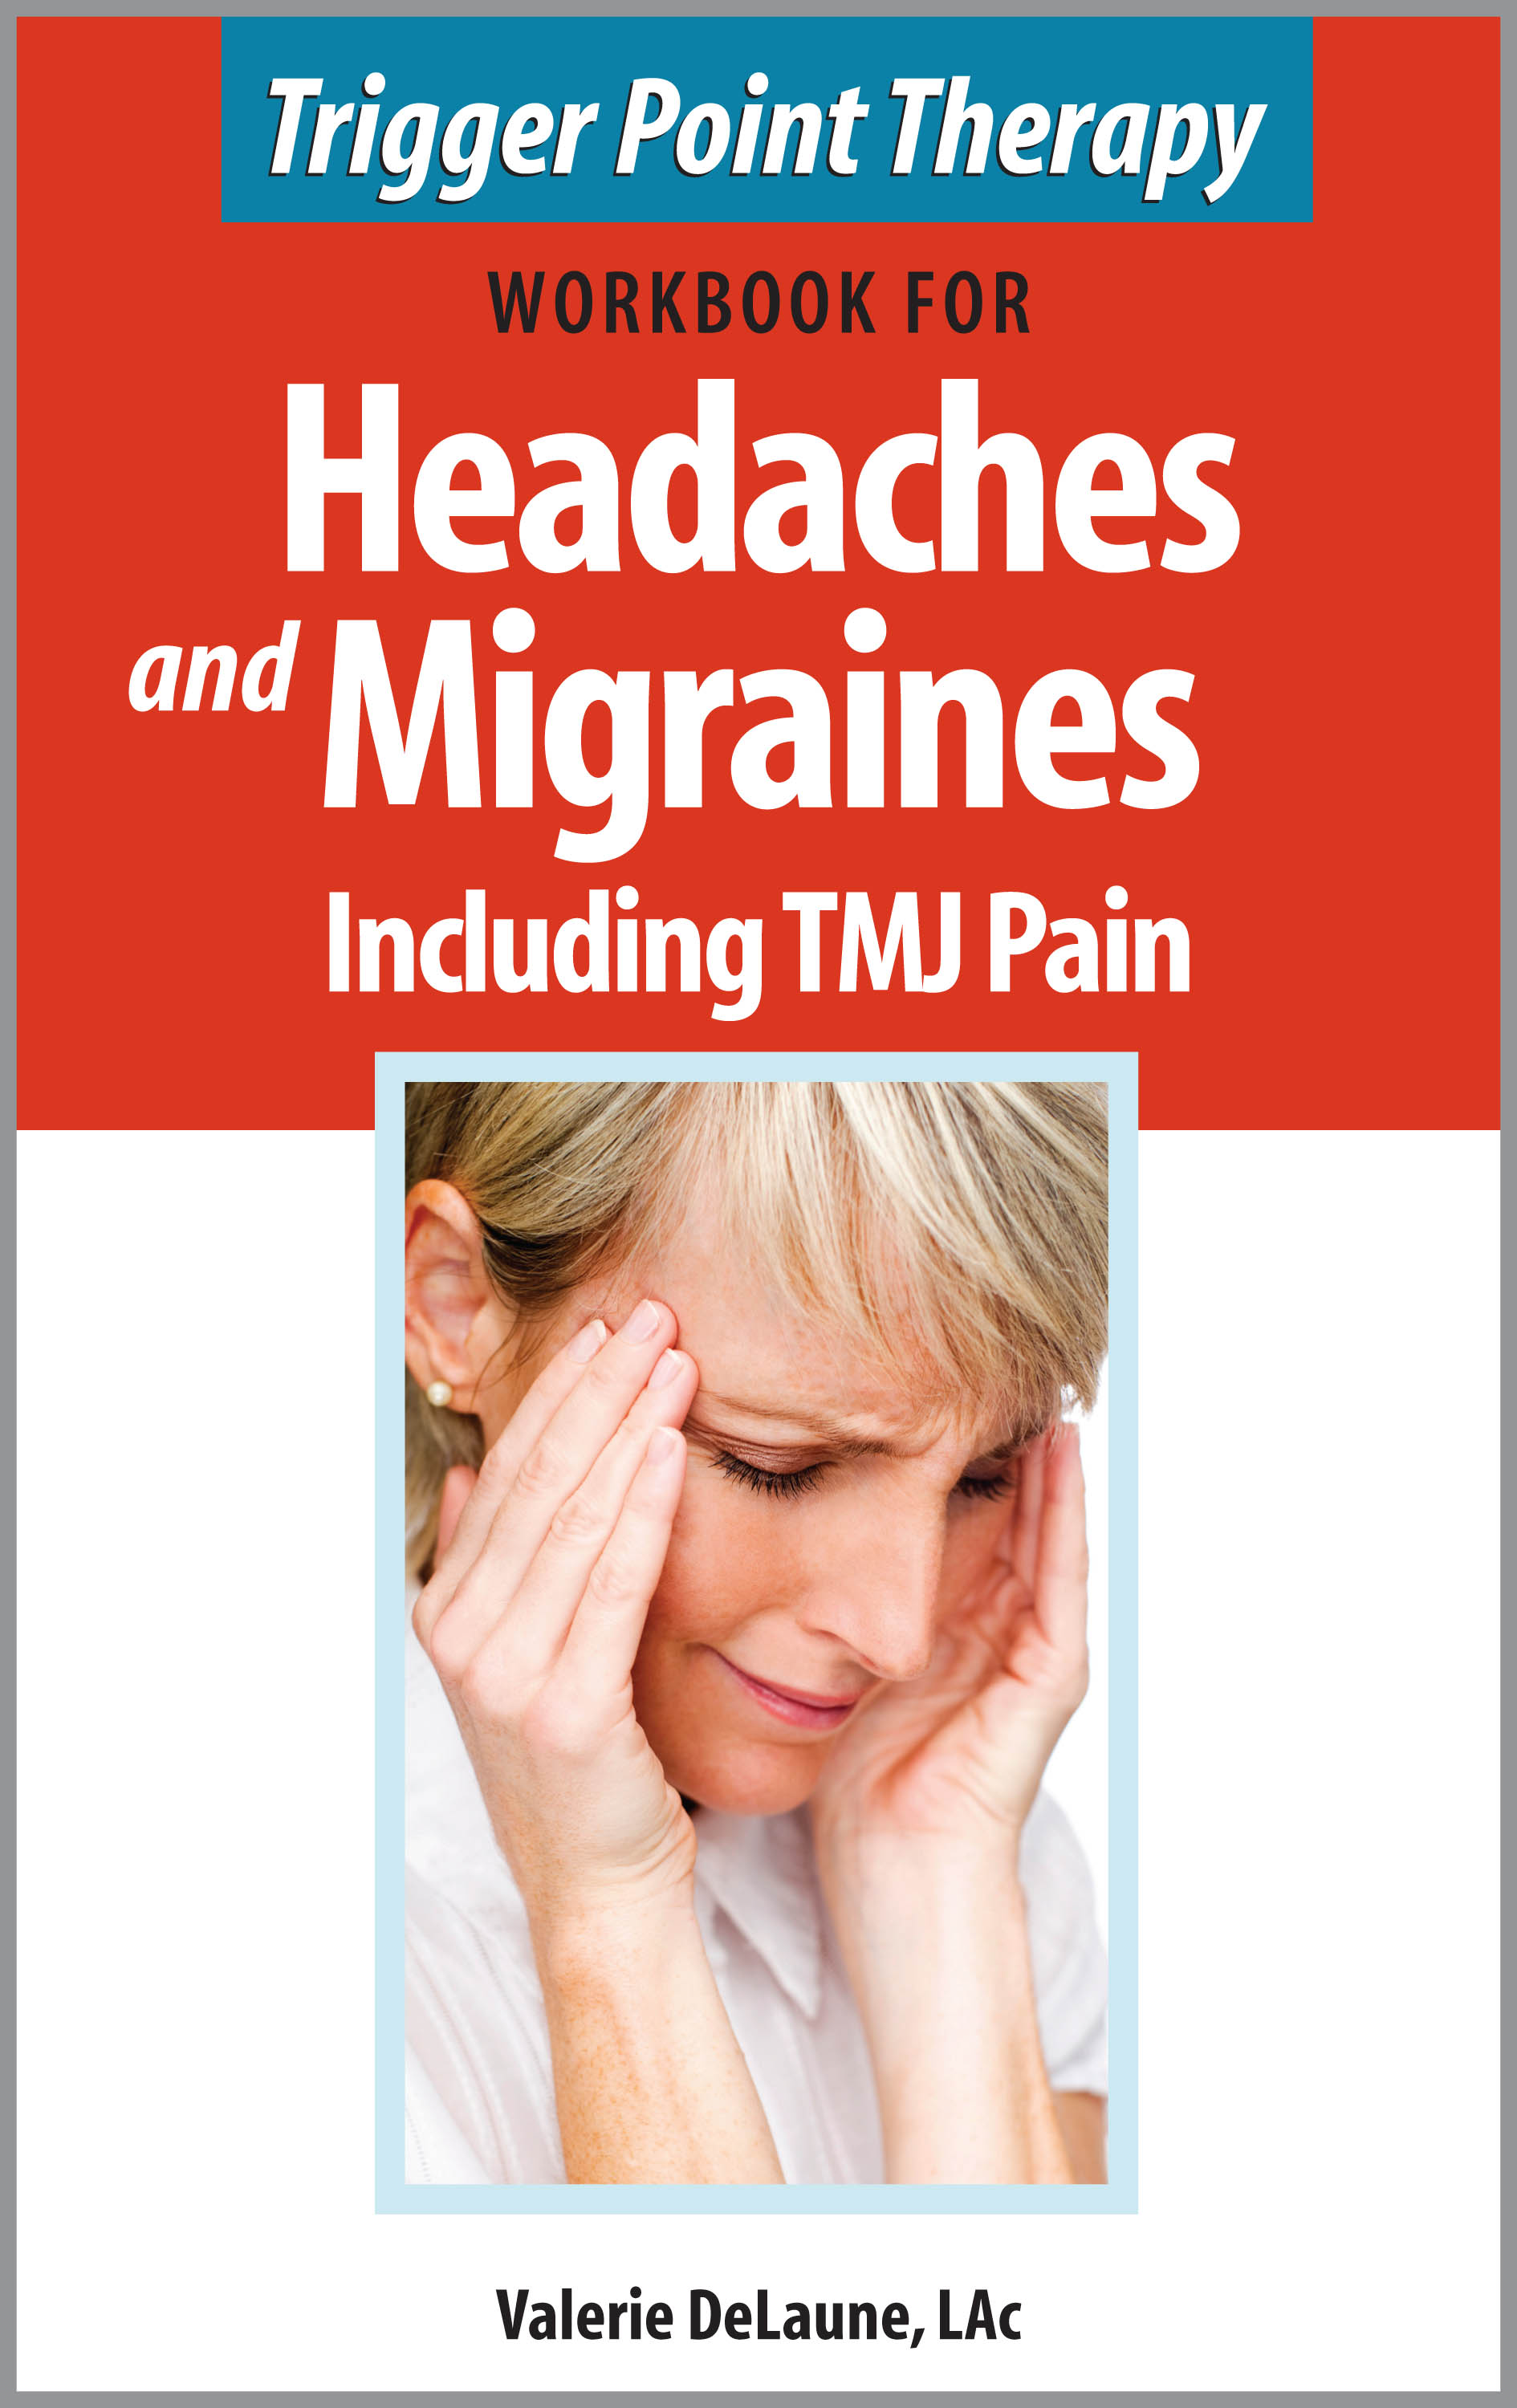 Trigger Point Therapy for Headaches and Migraines